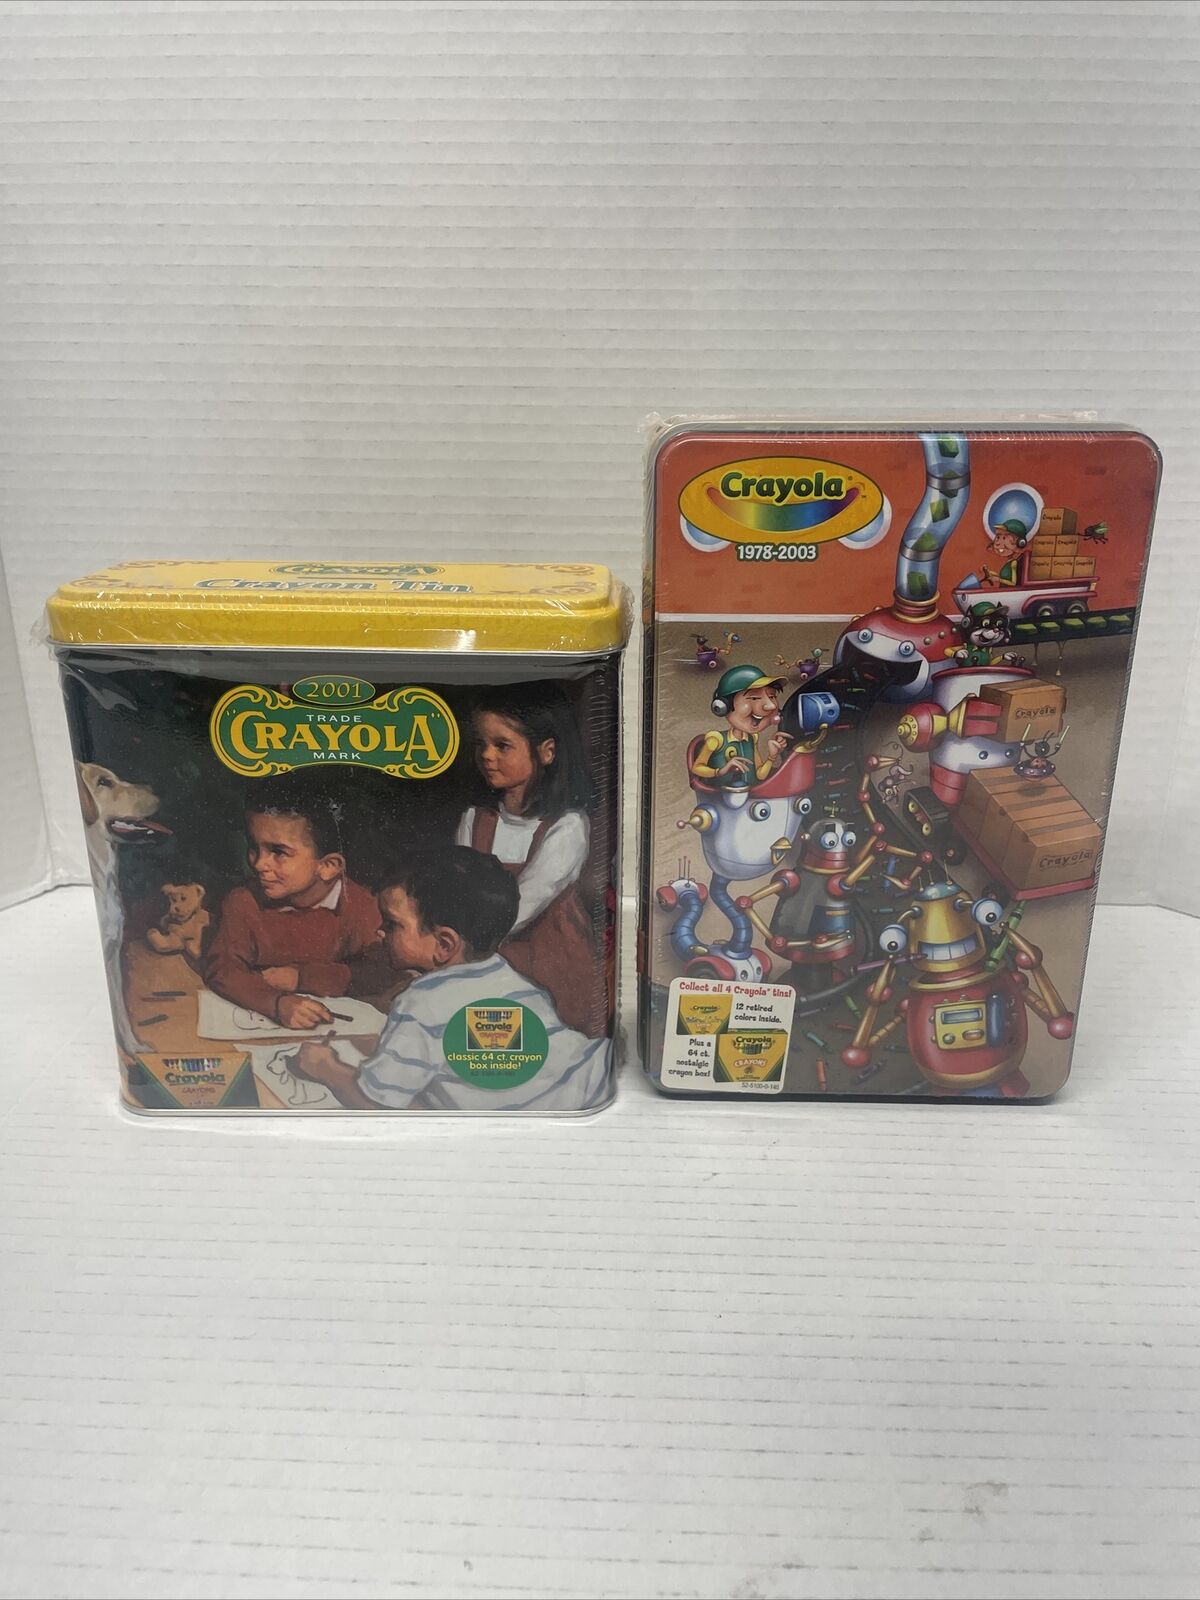 Crayons Crayola Collectible Tins 1978-2003 Sealed NEW 100 Anniversary Lot Of 2